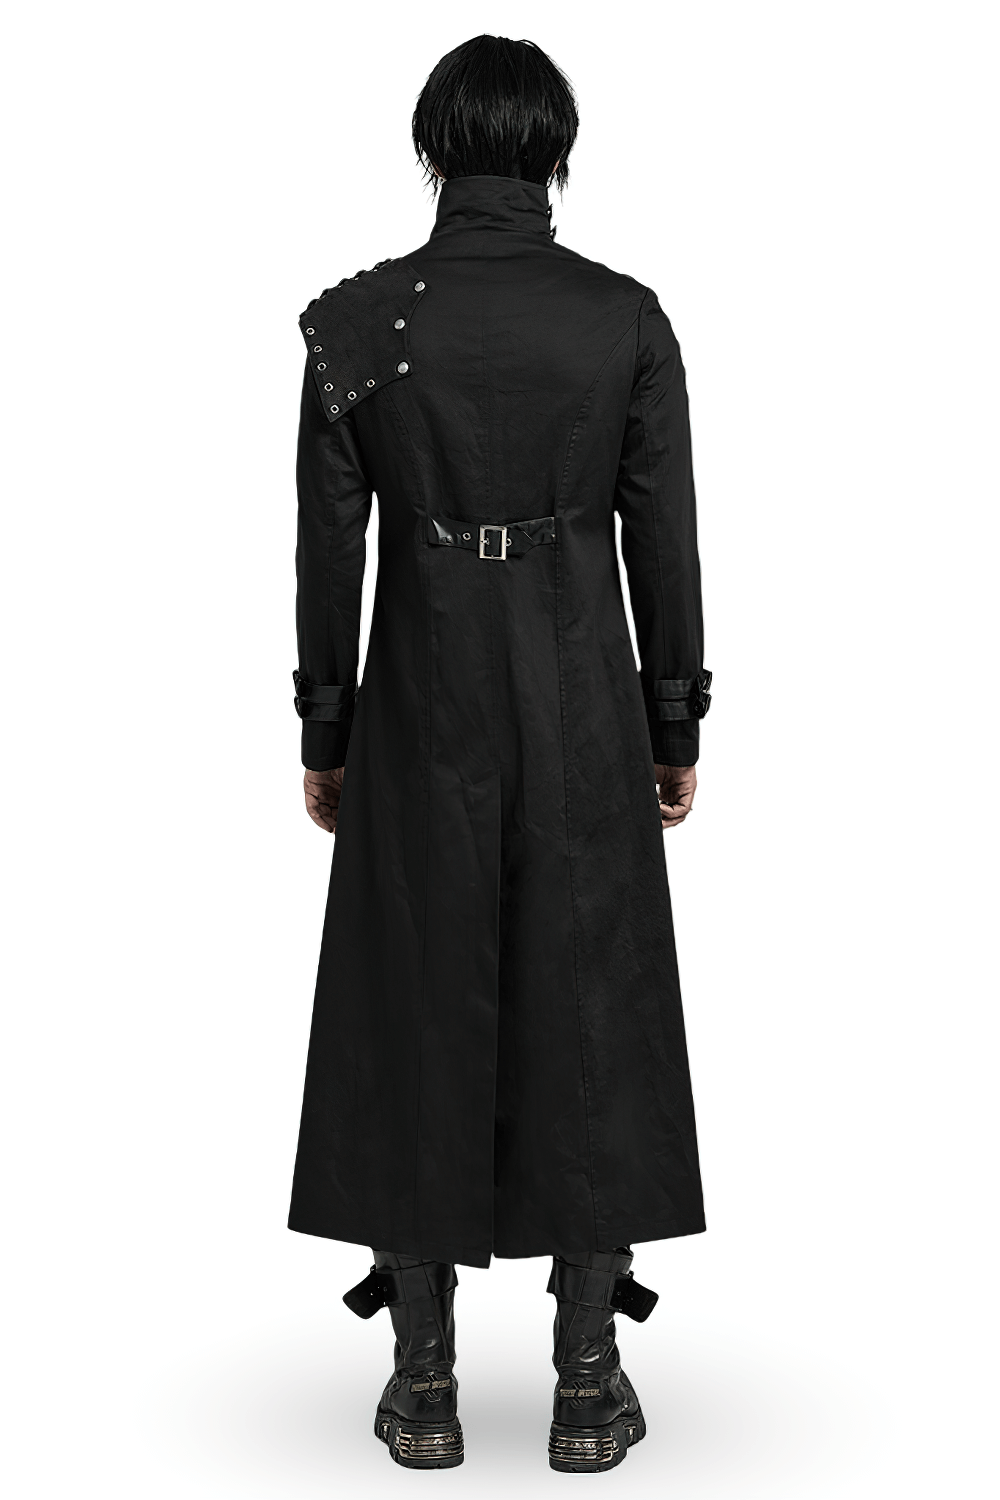 Men's Black Asymmetrical Trench Coat with Buckles